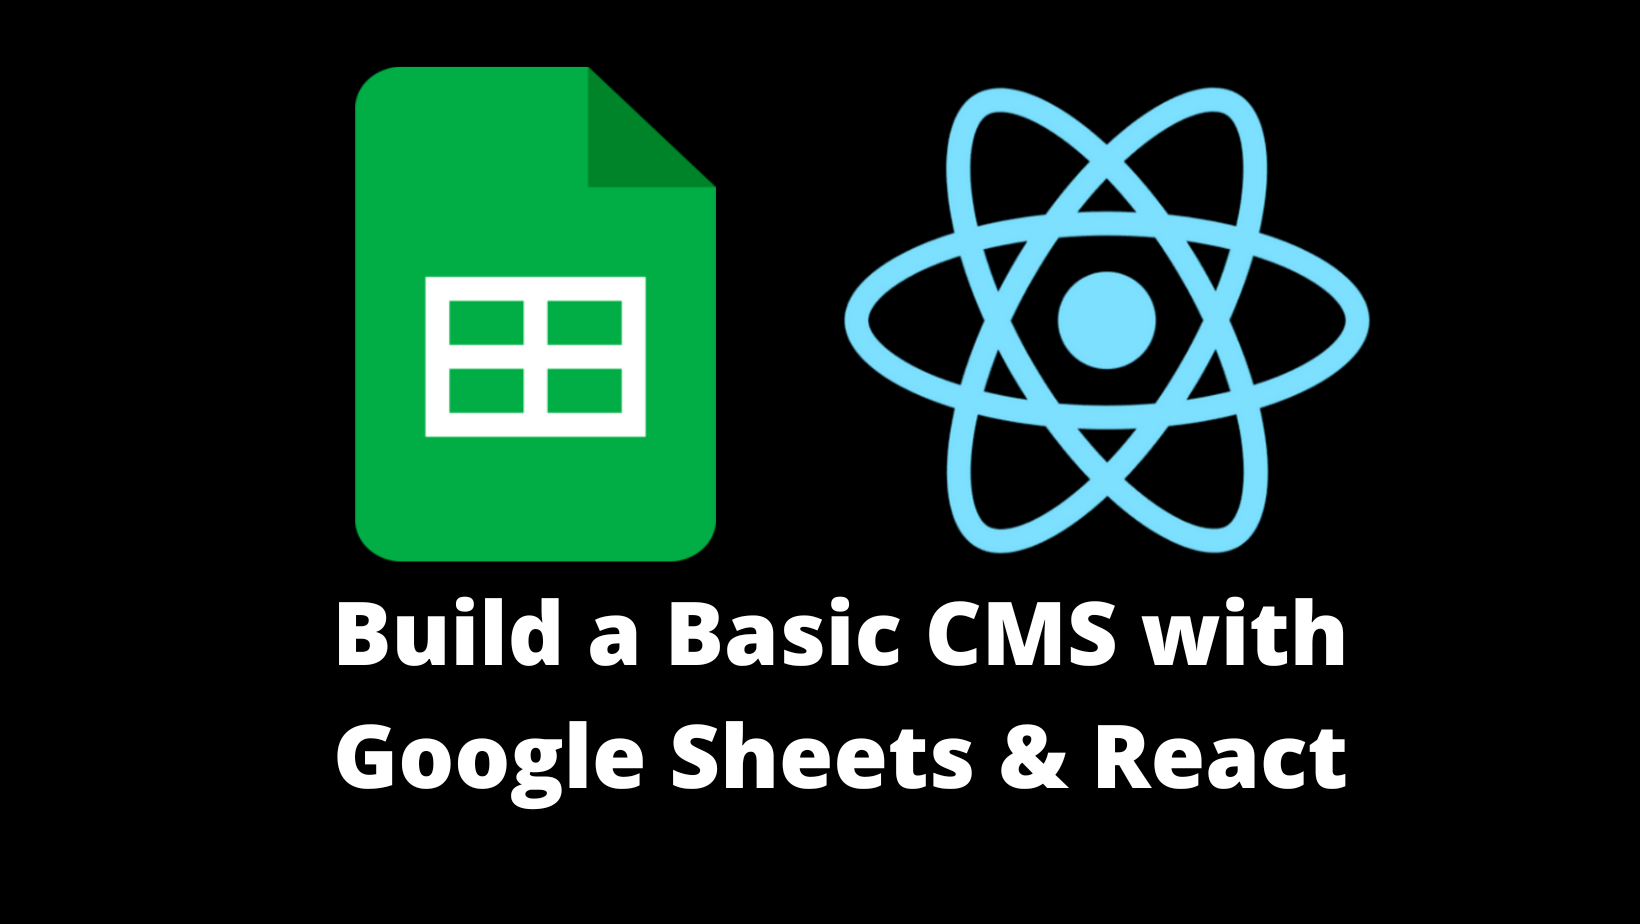 How to Build a Basic CMS with Google Sheets and React